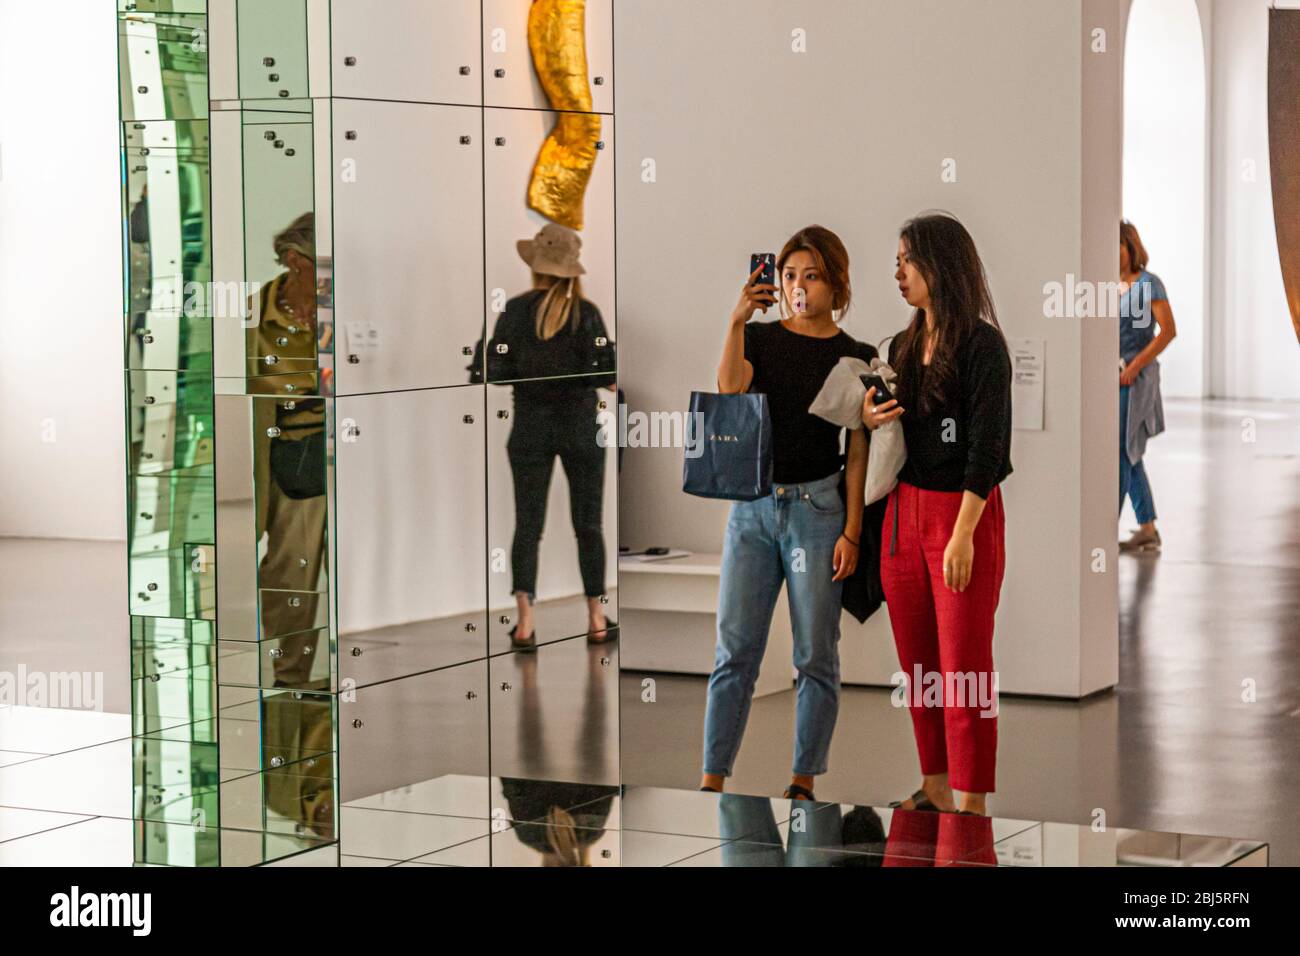 The mirror, the selfie and me! And the art? Some visitors only see their own self in the context of the exhibition. Exhibition documenta 14, Kassel, Germany Stock Photo